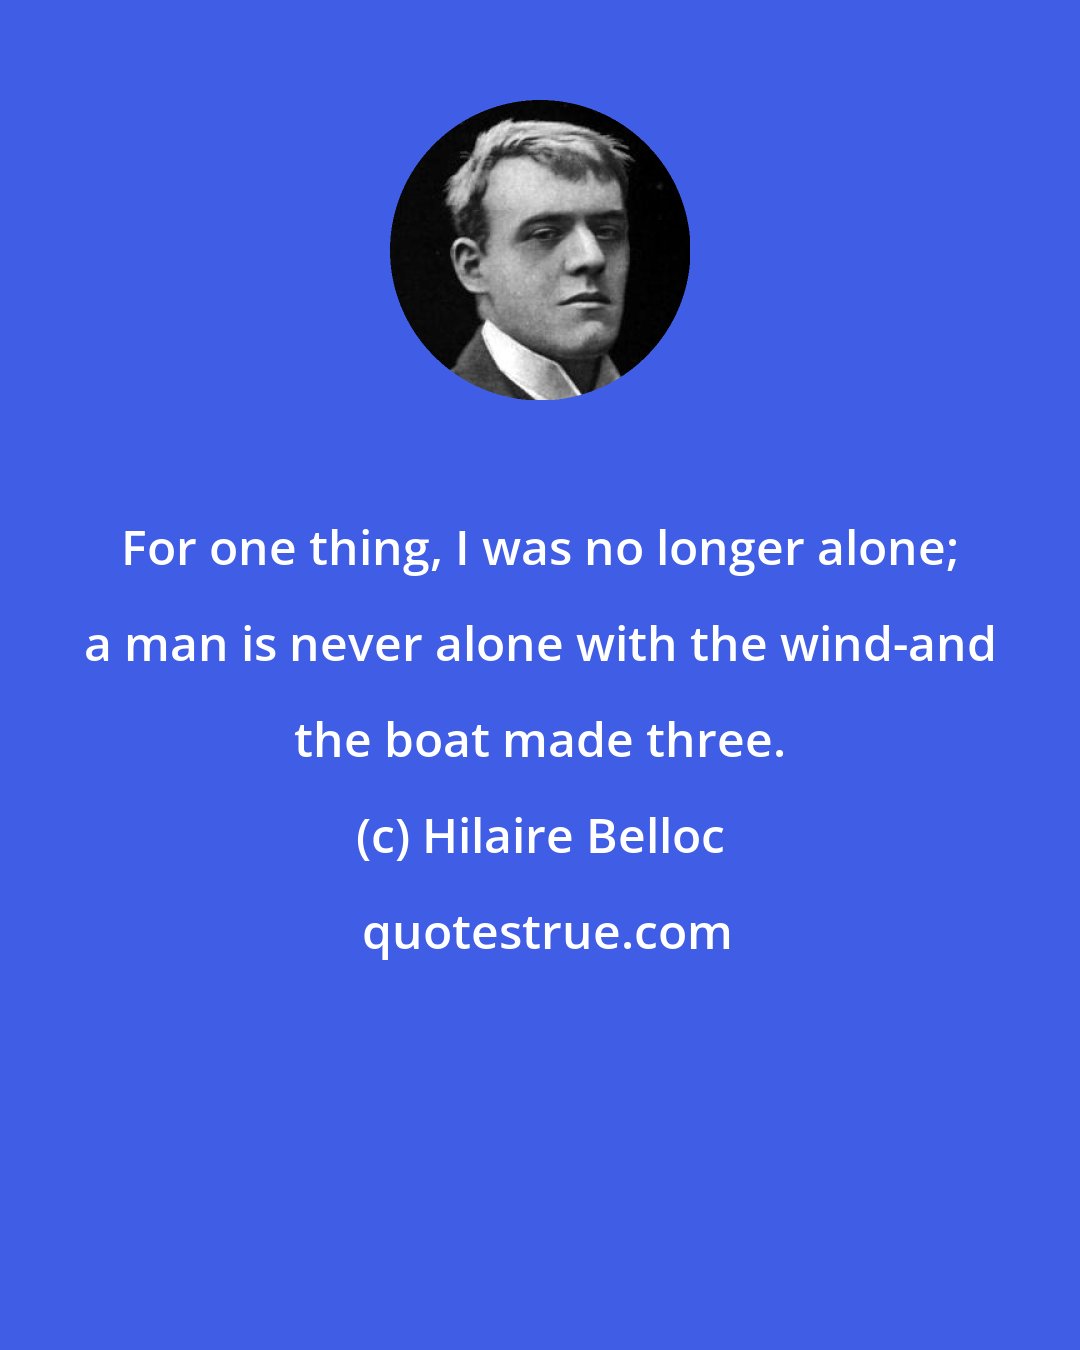 Hilaire Belloc: For one thing, I was no longer alone; a man is never alone with the wind-and the boat made three.